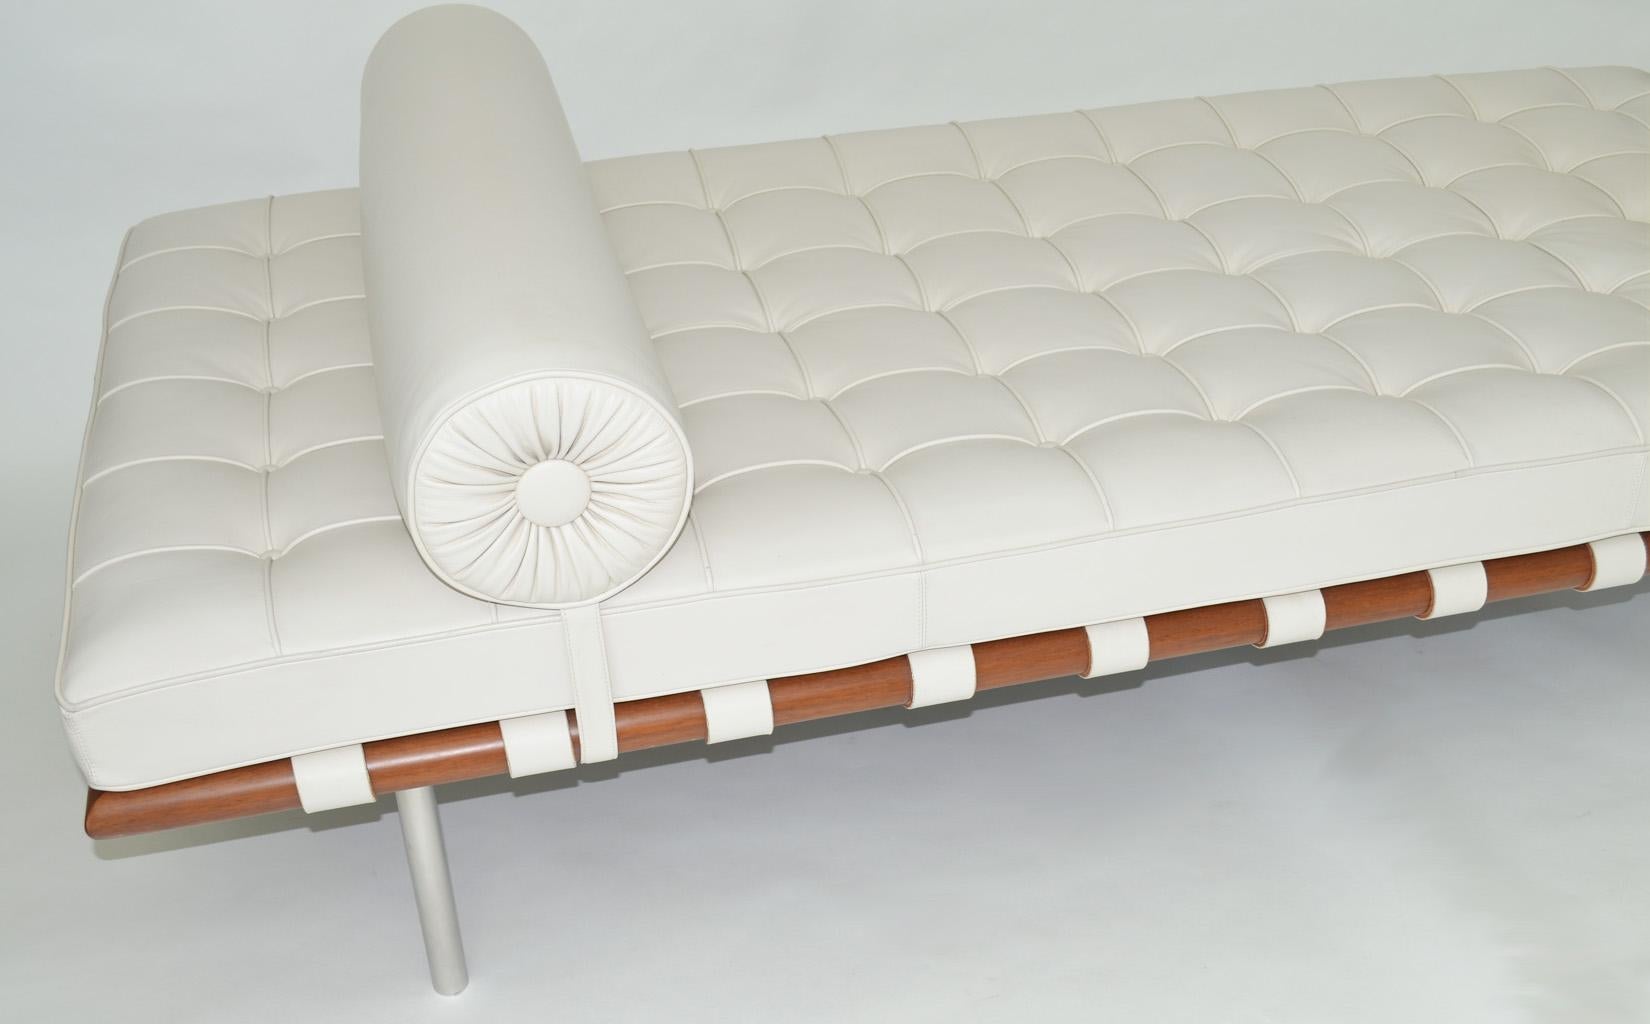 Knoll Barcelona couch daybed or sofa in white Sabrina leather, circa 1997 Ludwig Mies van der Rohe 1930 excellent condition.

Designed in 1930, the Barcelona couch daybed or sofa shares the same simple elegance as its iconic counterpart,